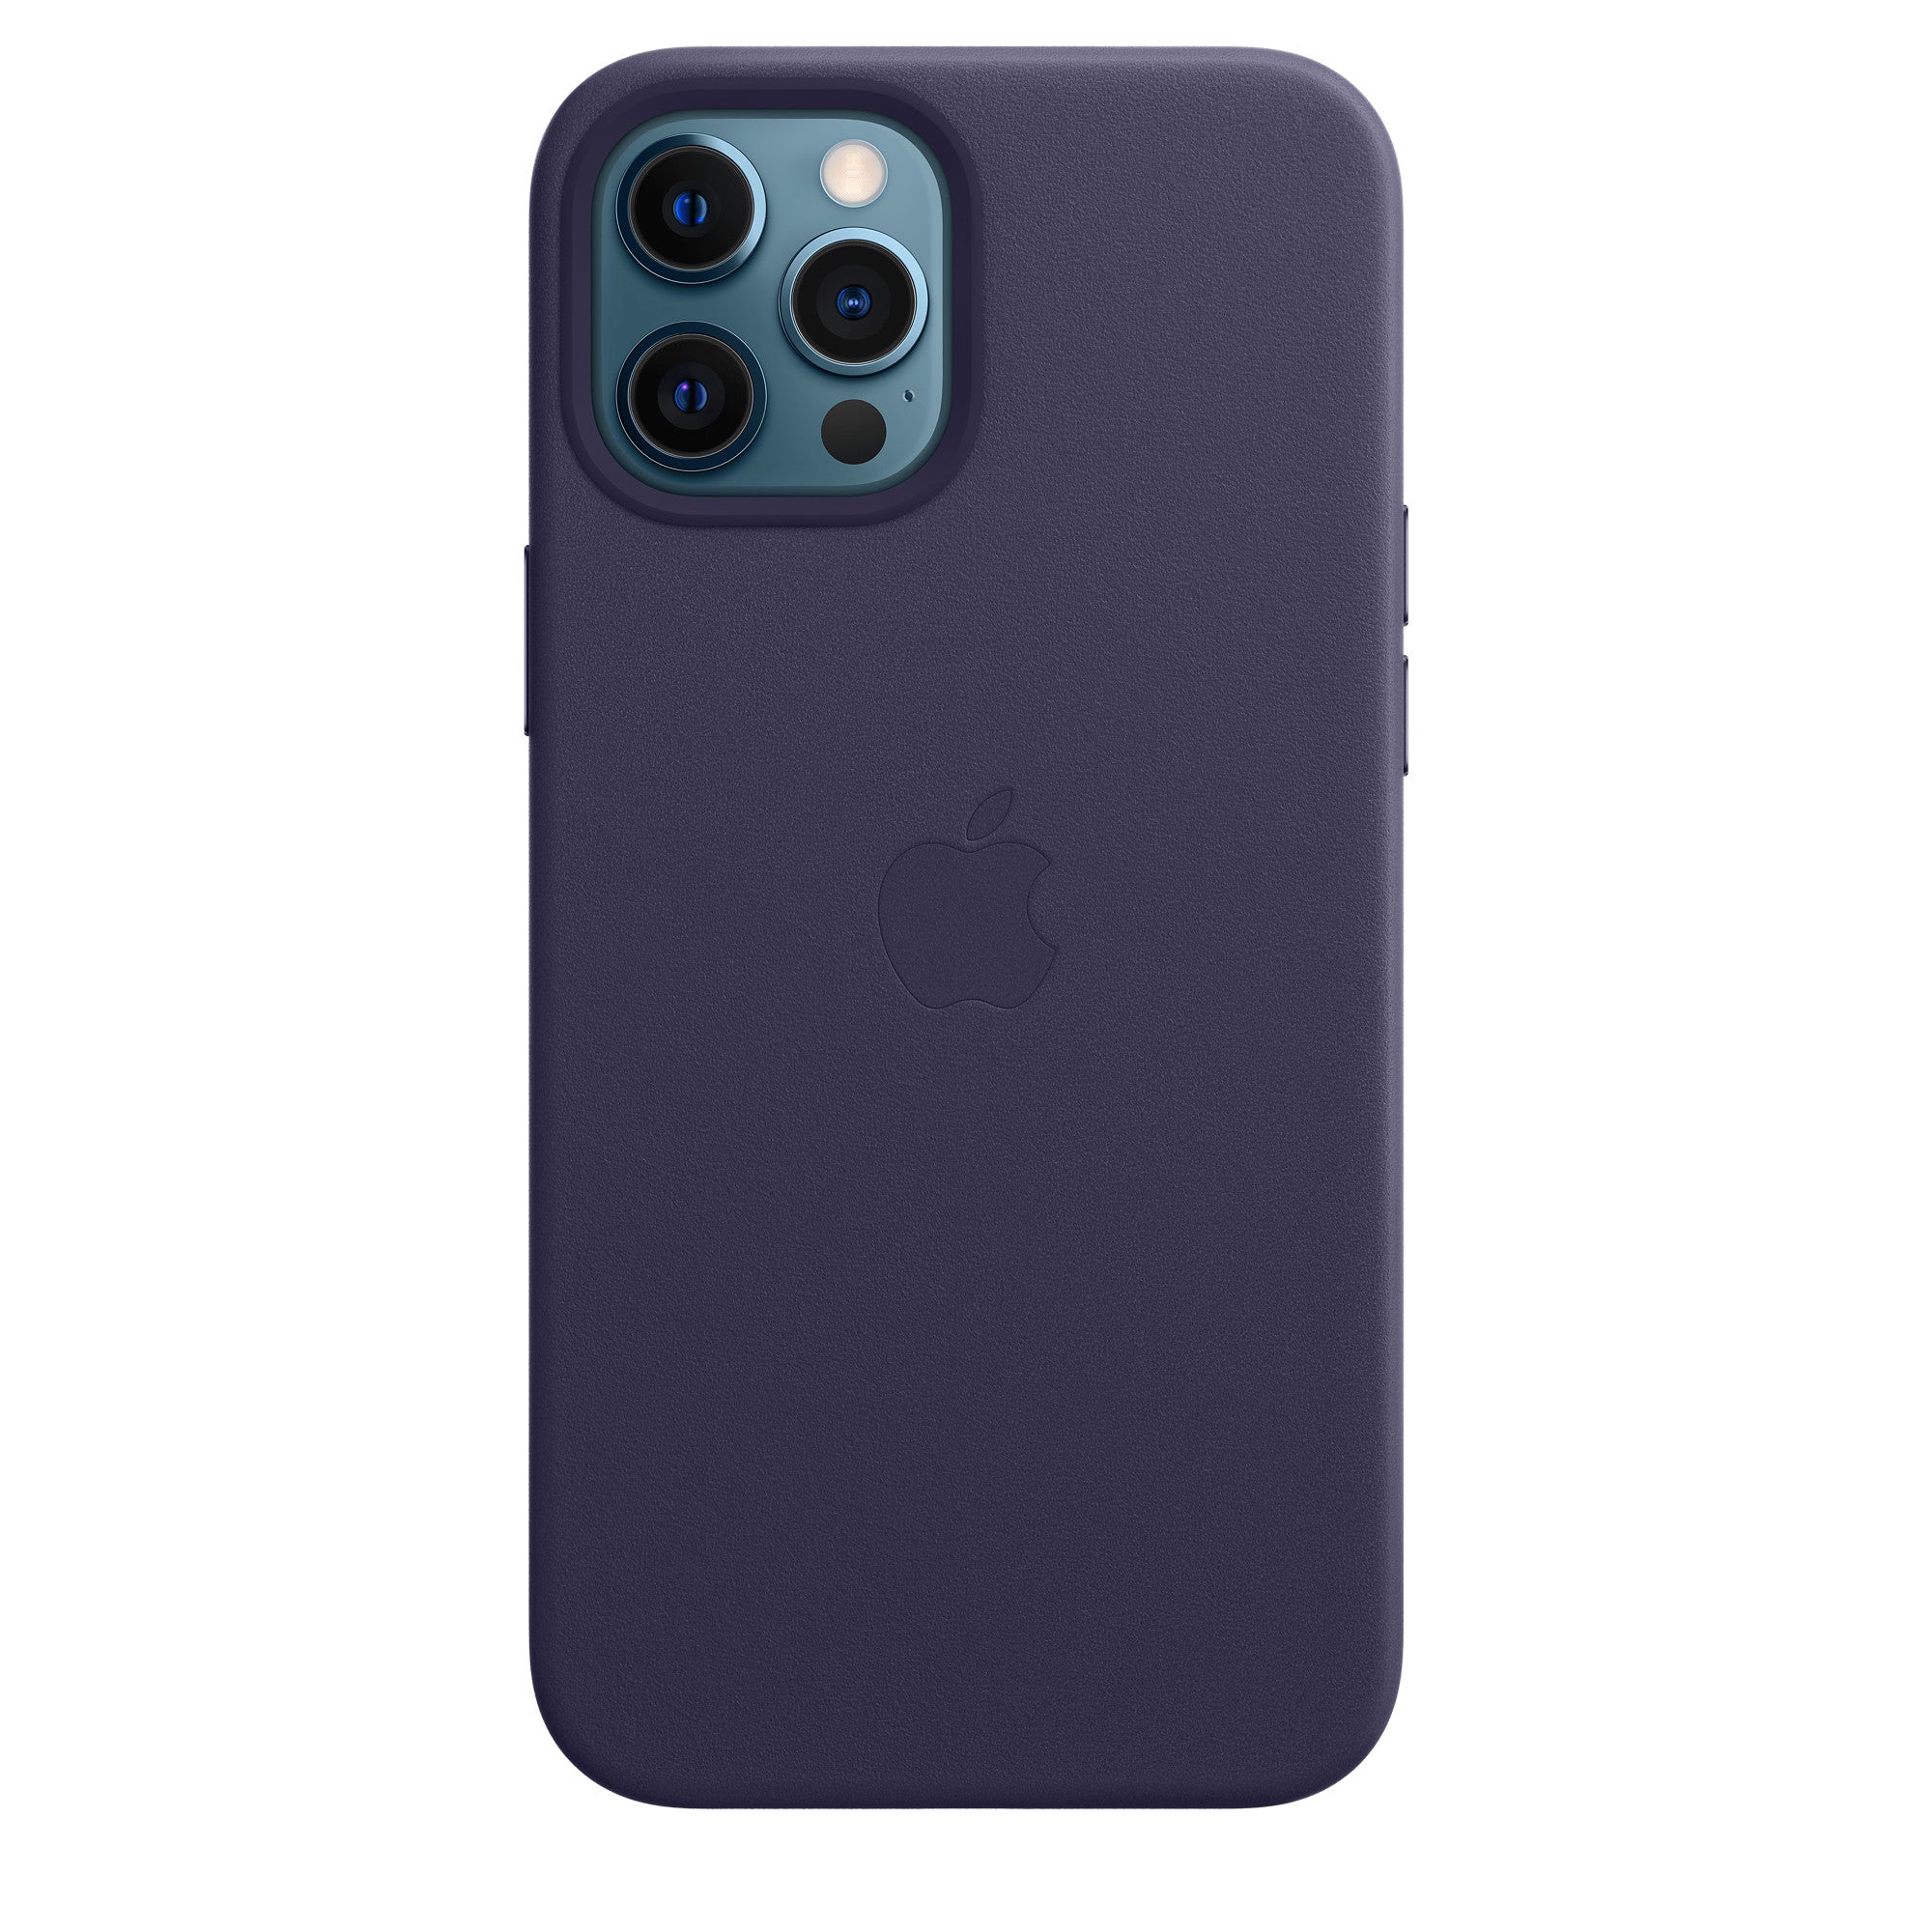 Apple iPhone 12 Pro Max Leather Case - Deep Violet